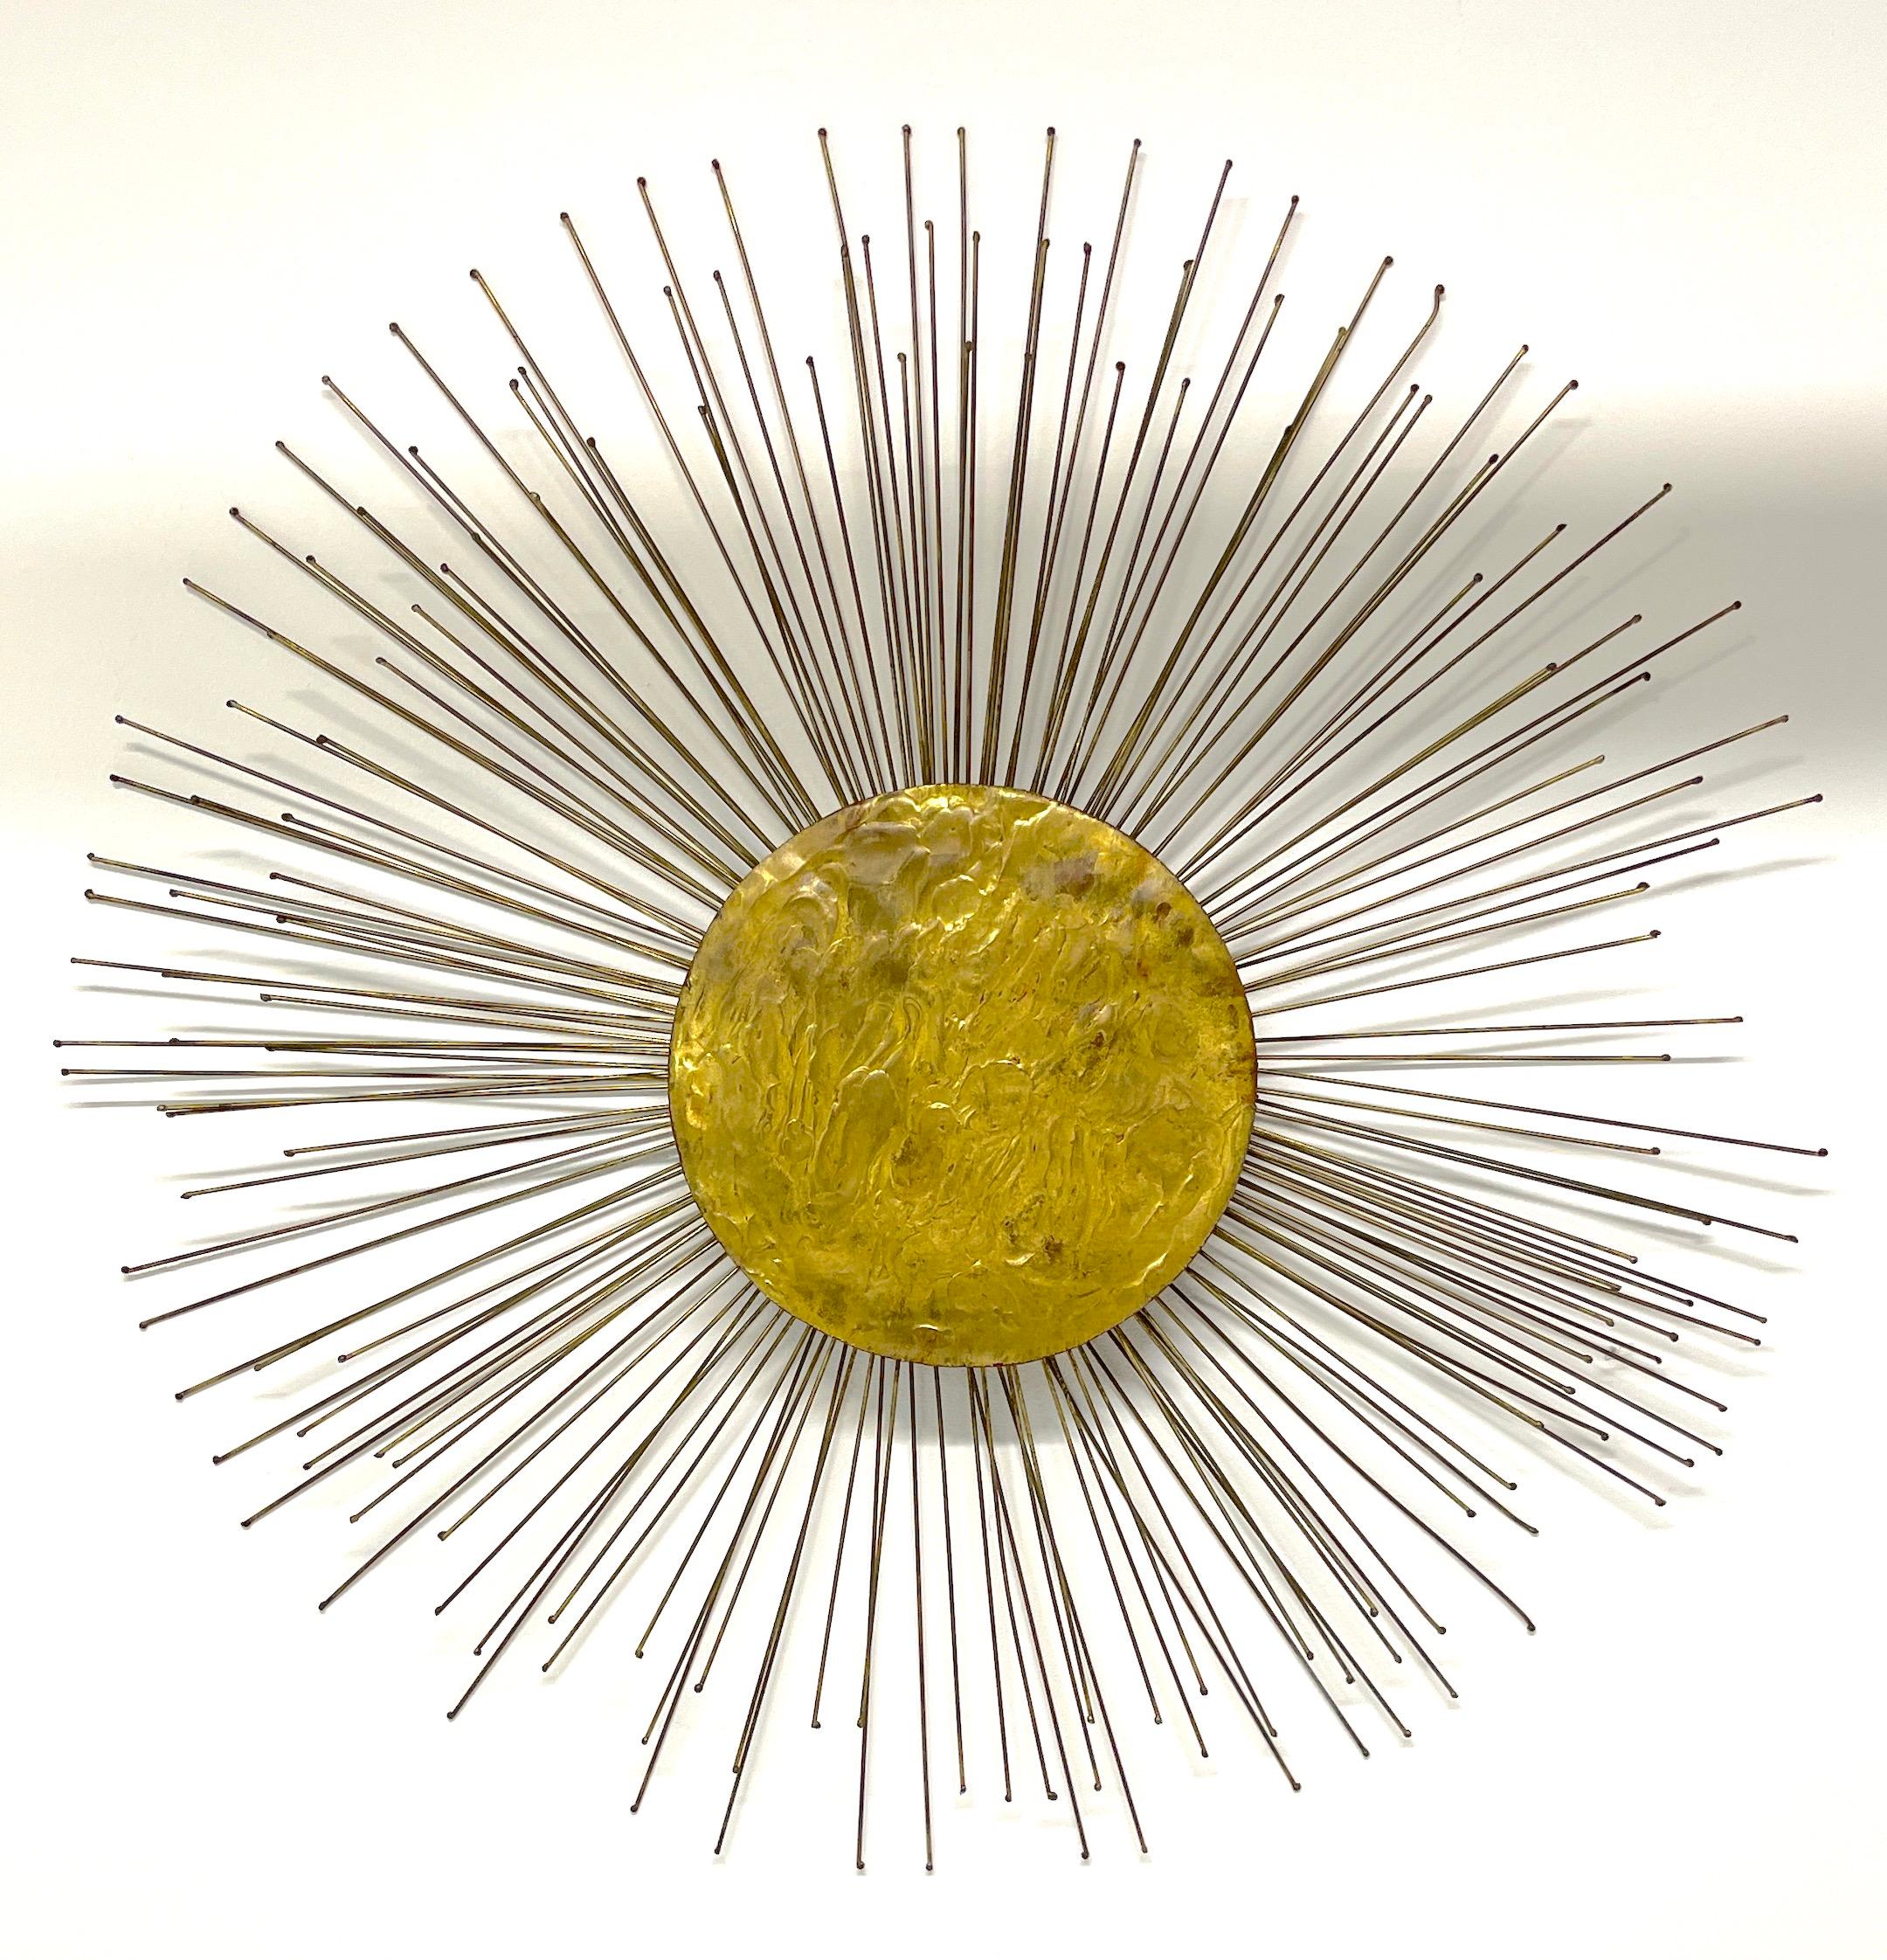  Midcentury Gilt Bronze Sunburst Wall Sculpture, Attributed to William Friedle  For Sale 2